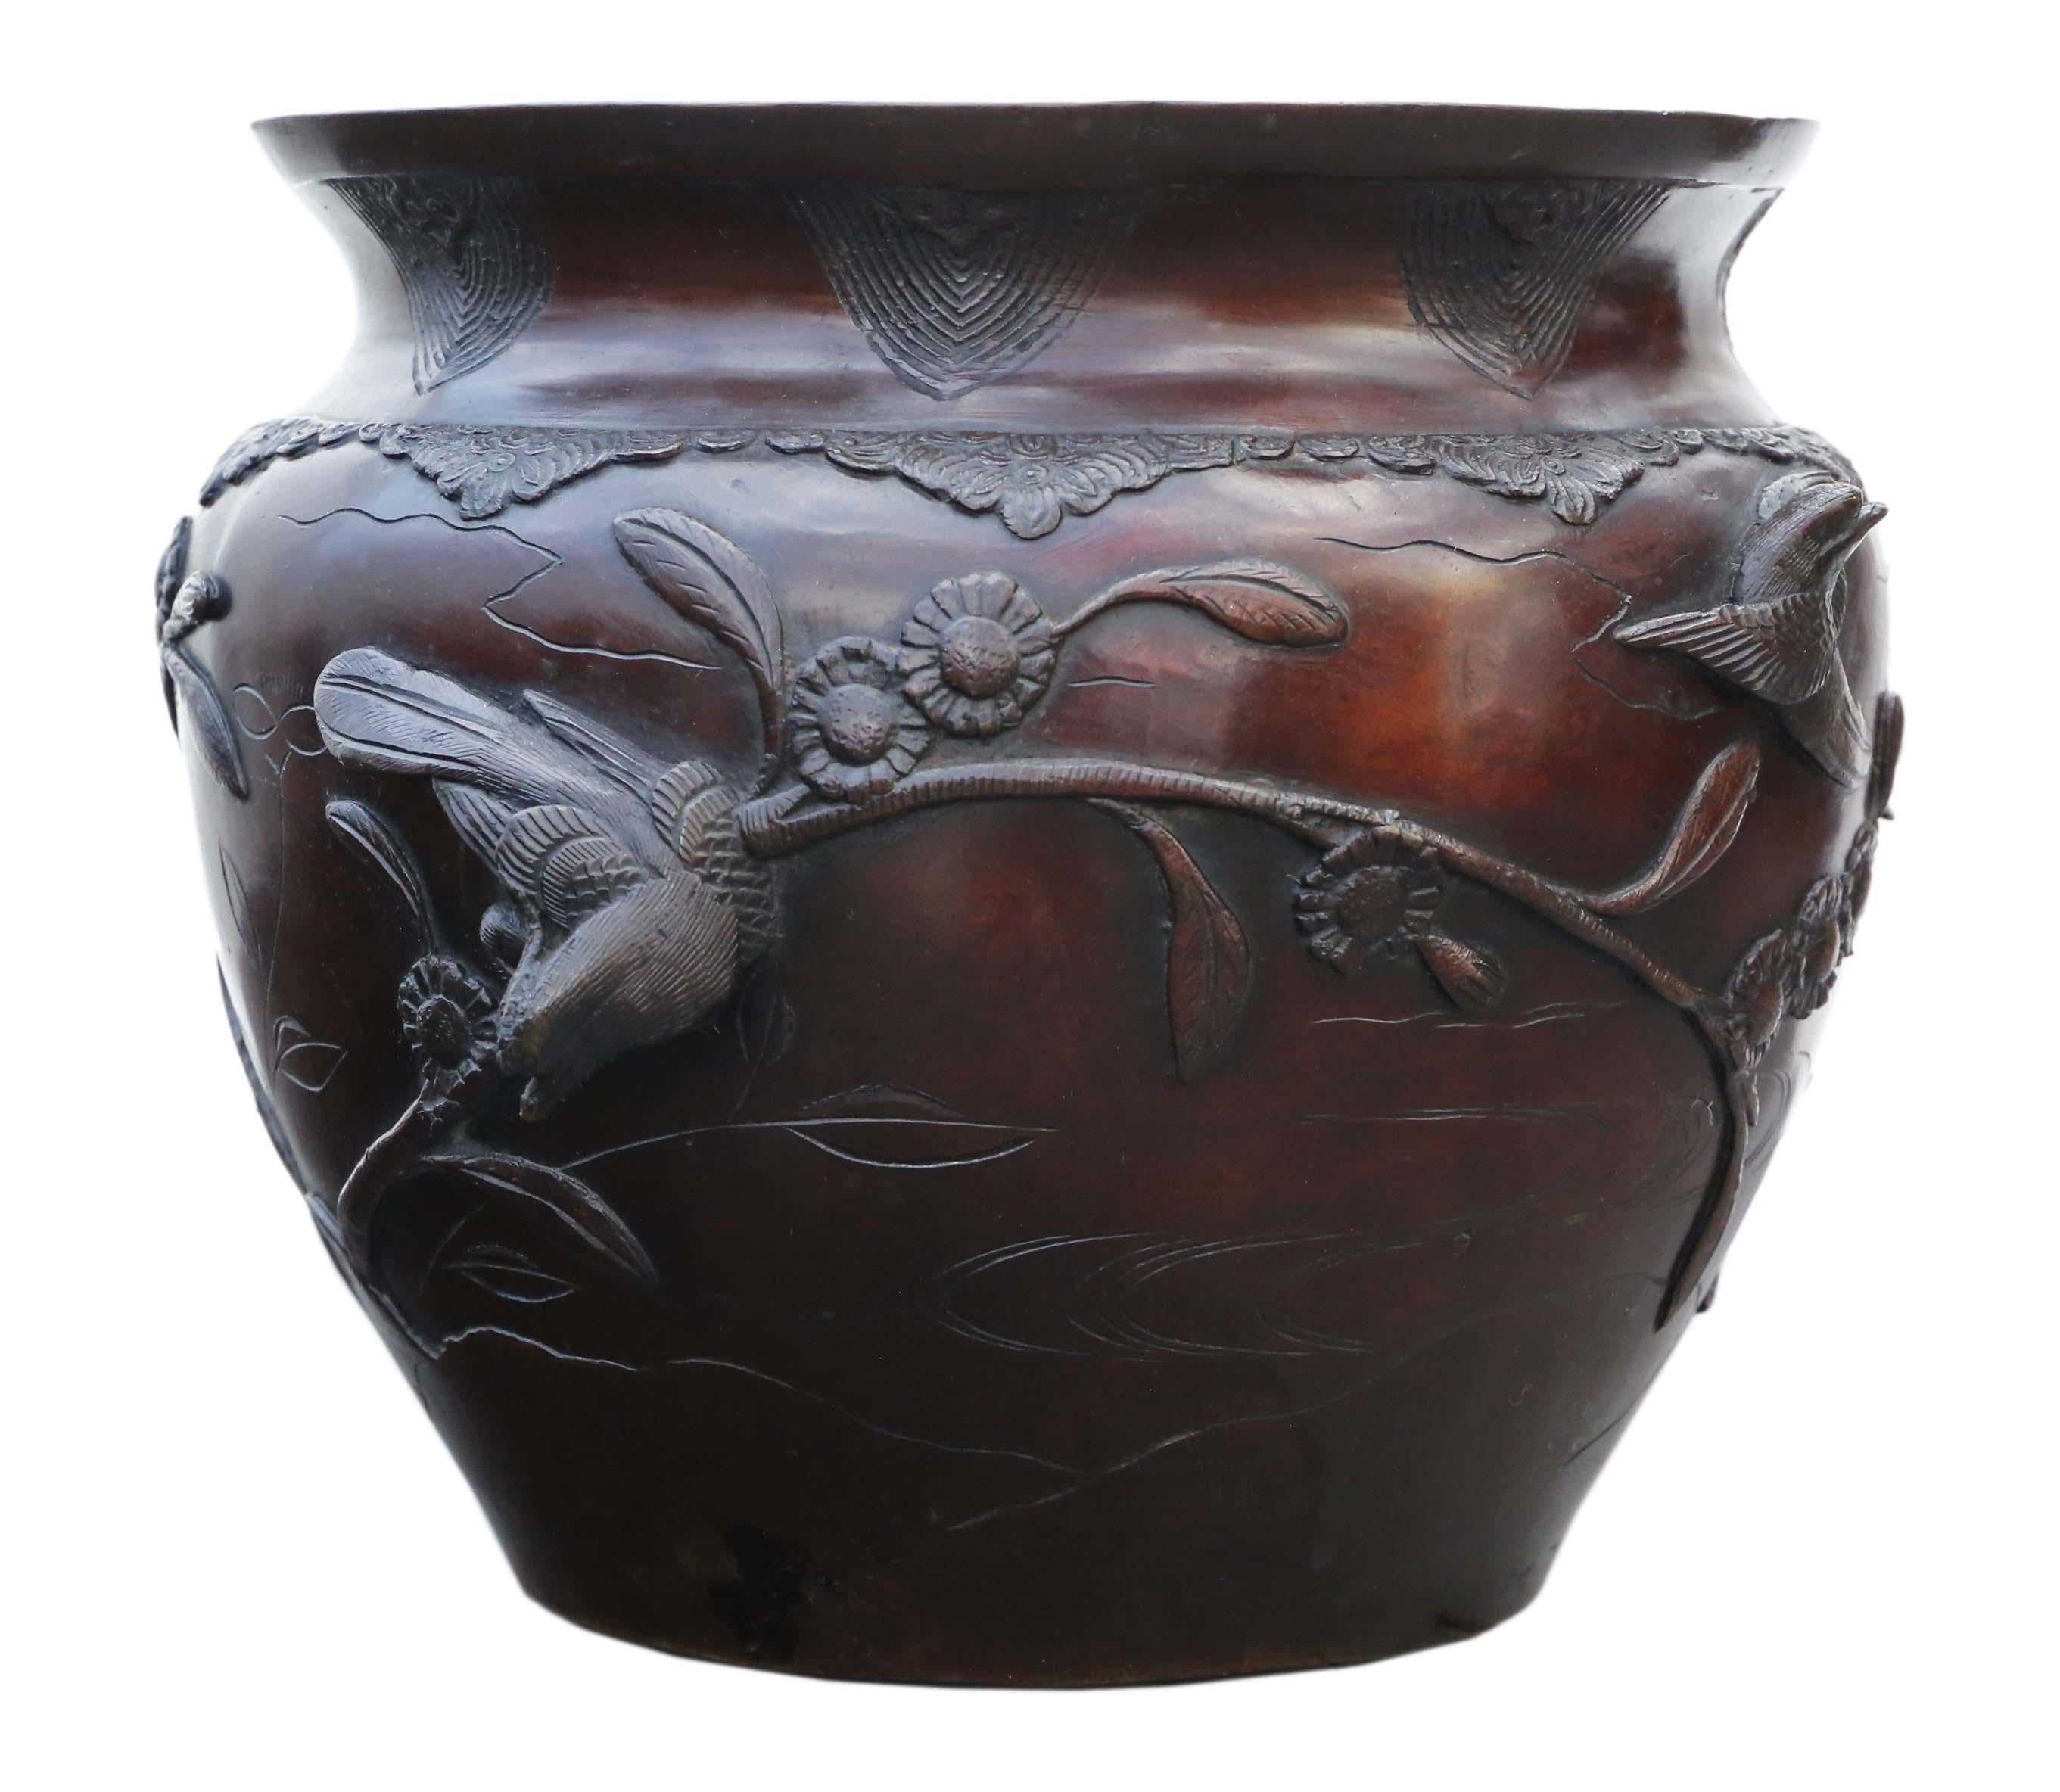 Antique large fine quality Oriental Japanese bronze Jardinière planter bowl censor Meiji Period 19th Century.

Would look amazing in the right location and make a fabulous centre piece. Great colour and patina.

Overall maximum dimensions: 26cm